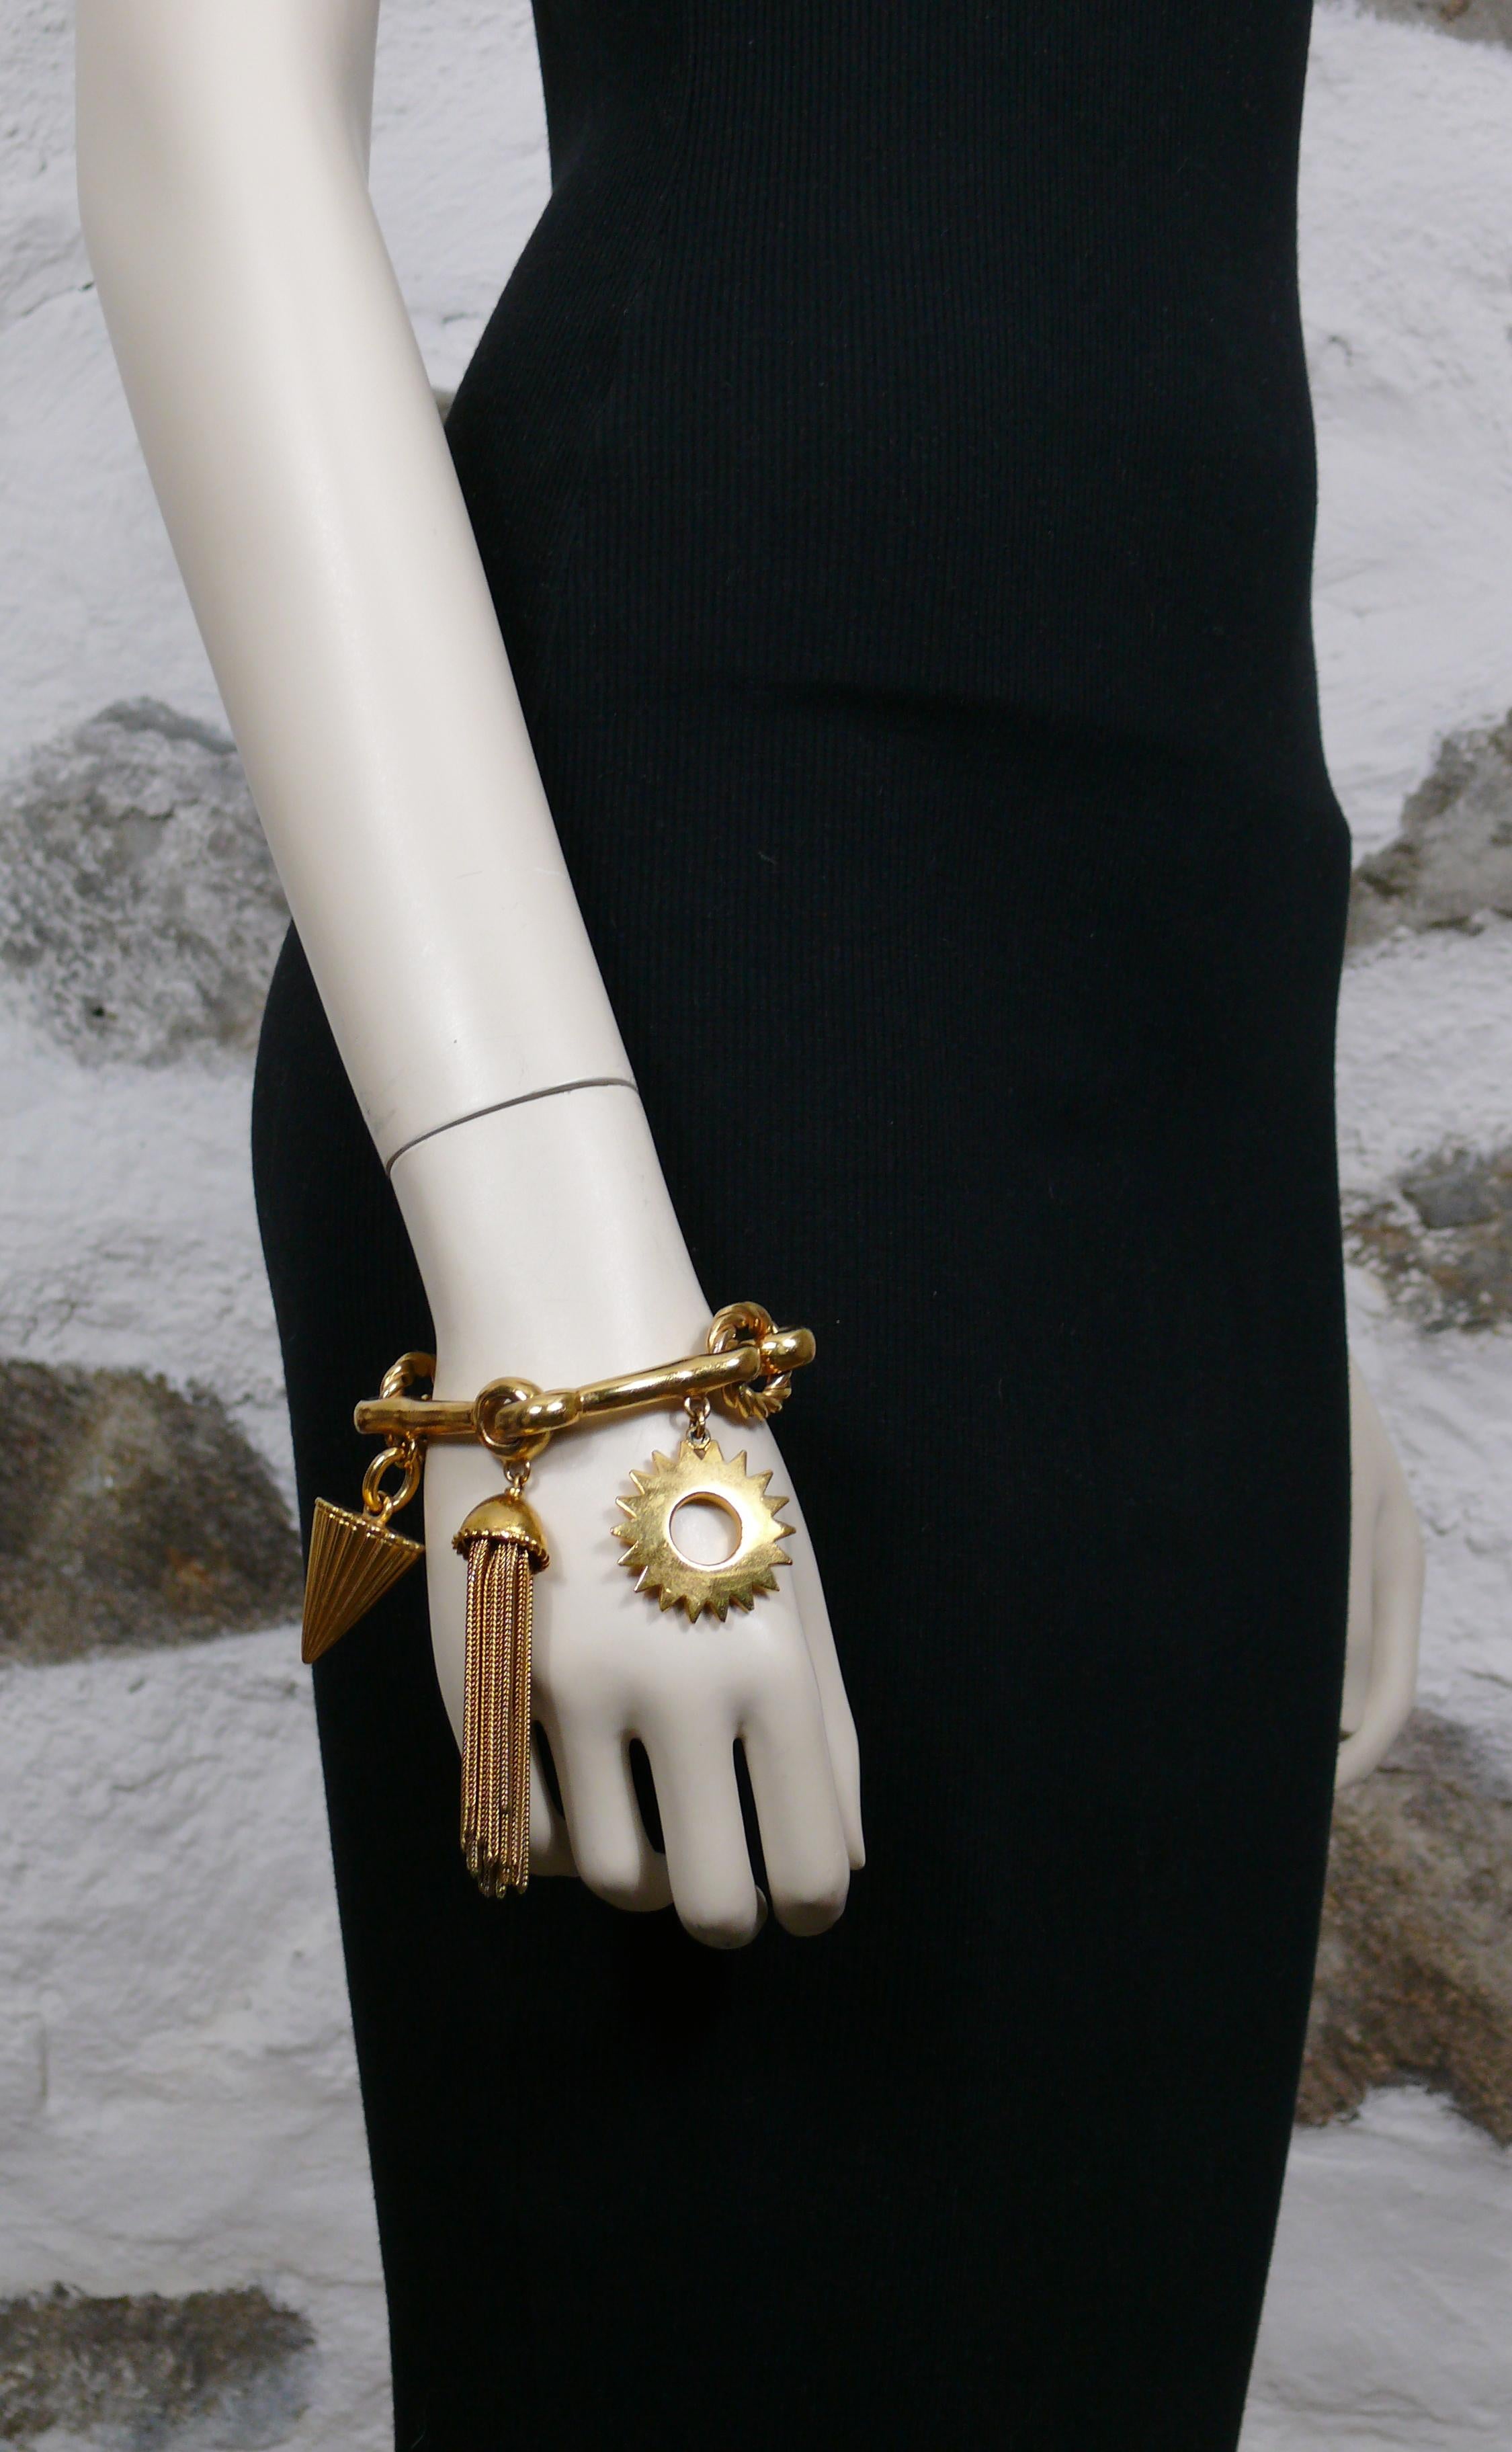 CHRISTIAN DIOR Boutique vintage rare gold toned articulated bracelet embellished with charms : ribbed conic shape, chain tassel and stylized sun.

The bracelet closes an opens thanks to an ingenious and hidden system of flattened ring.

Marked